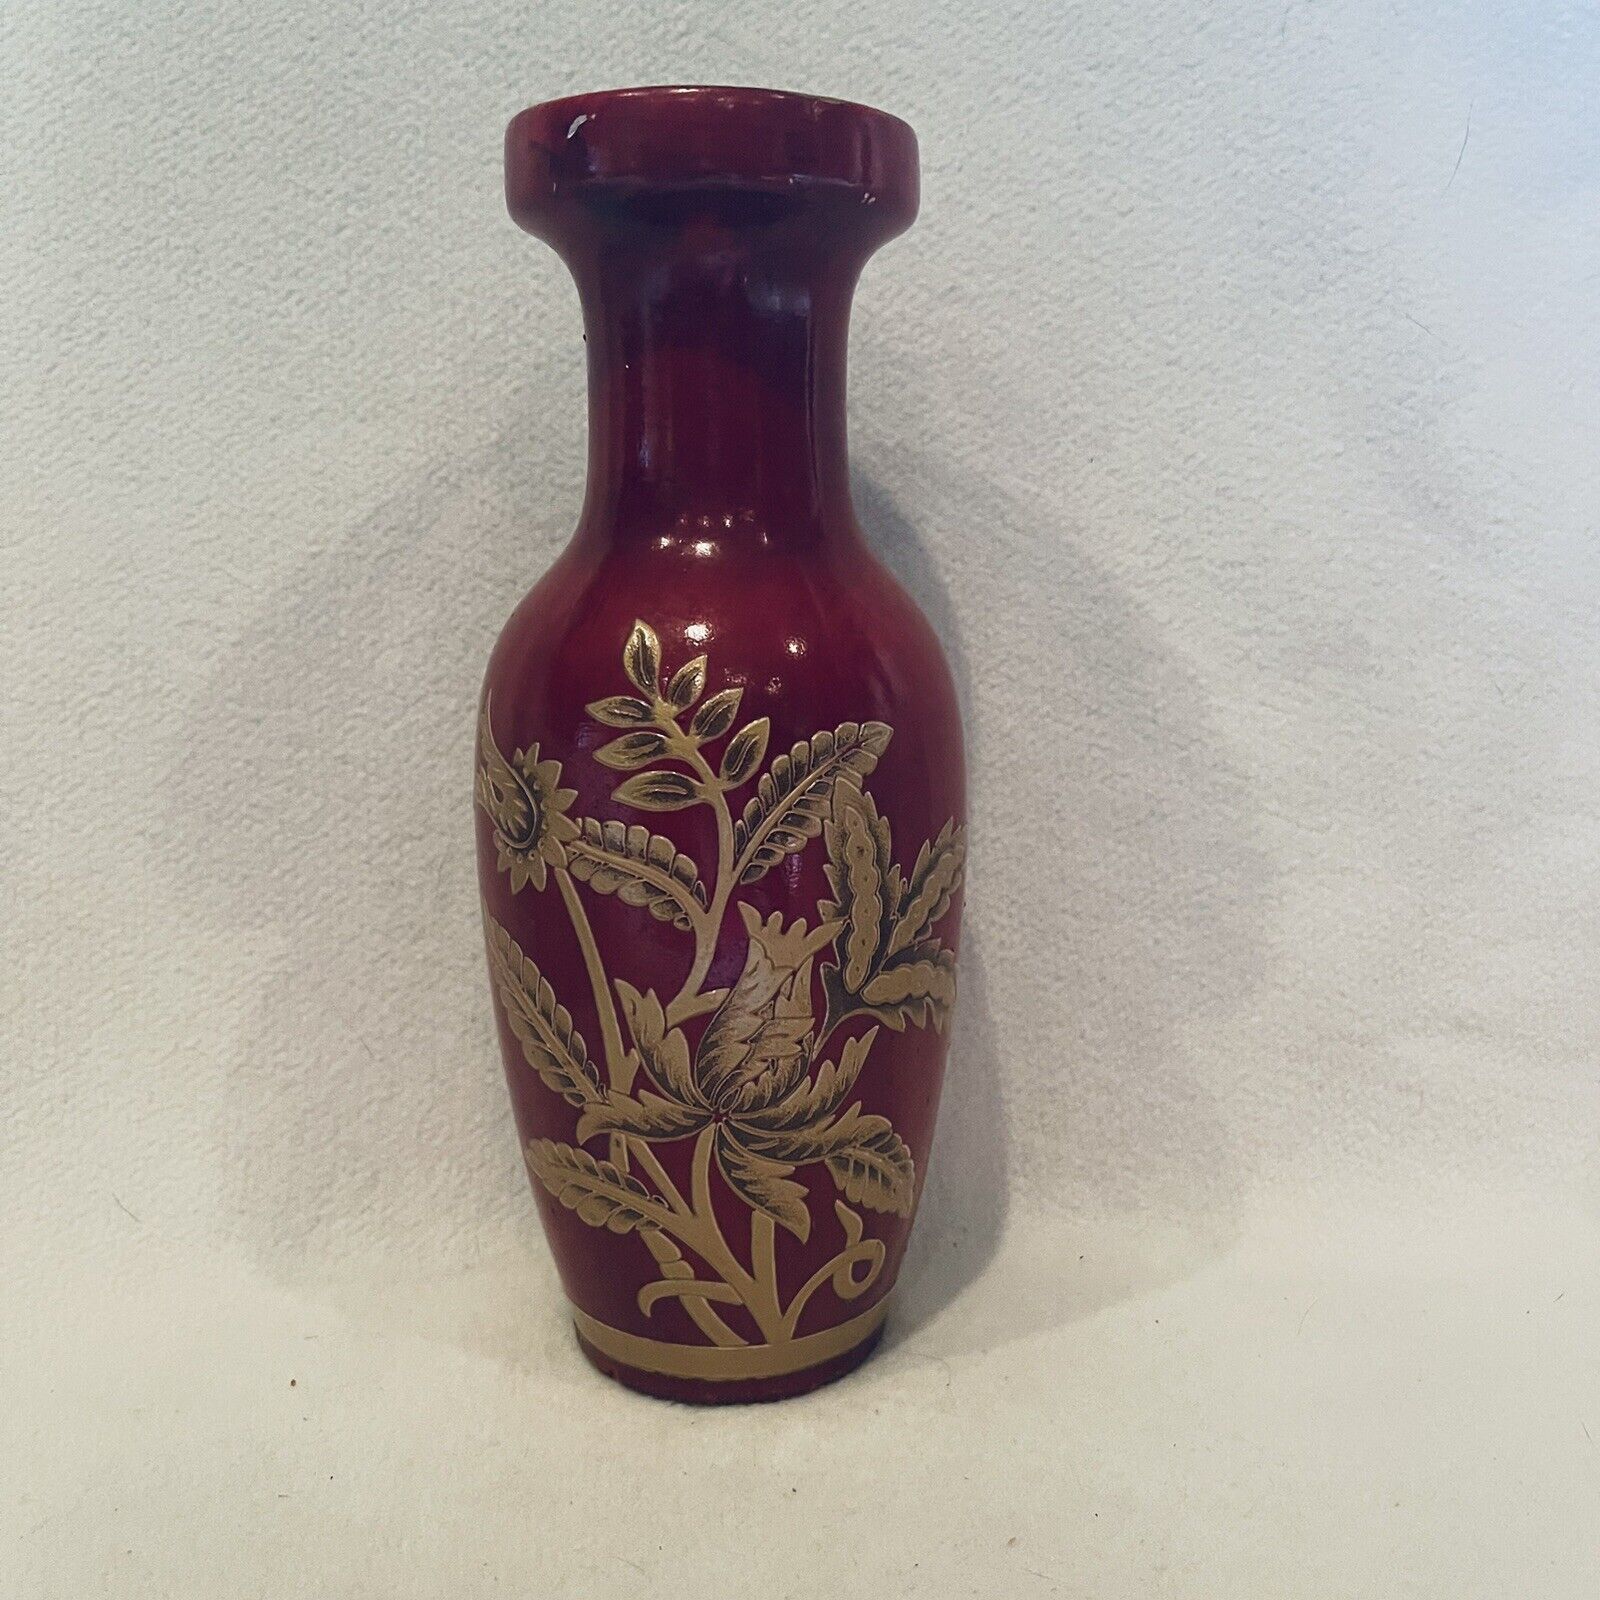 Red Vintage Chinese Porcelain Case With Gold Gilted Flowers And Leaves 9” Tall